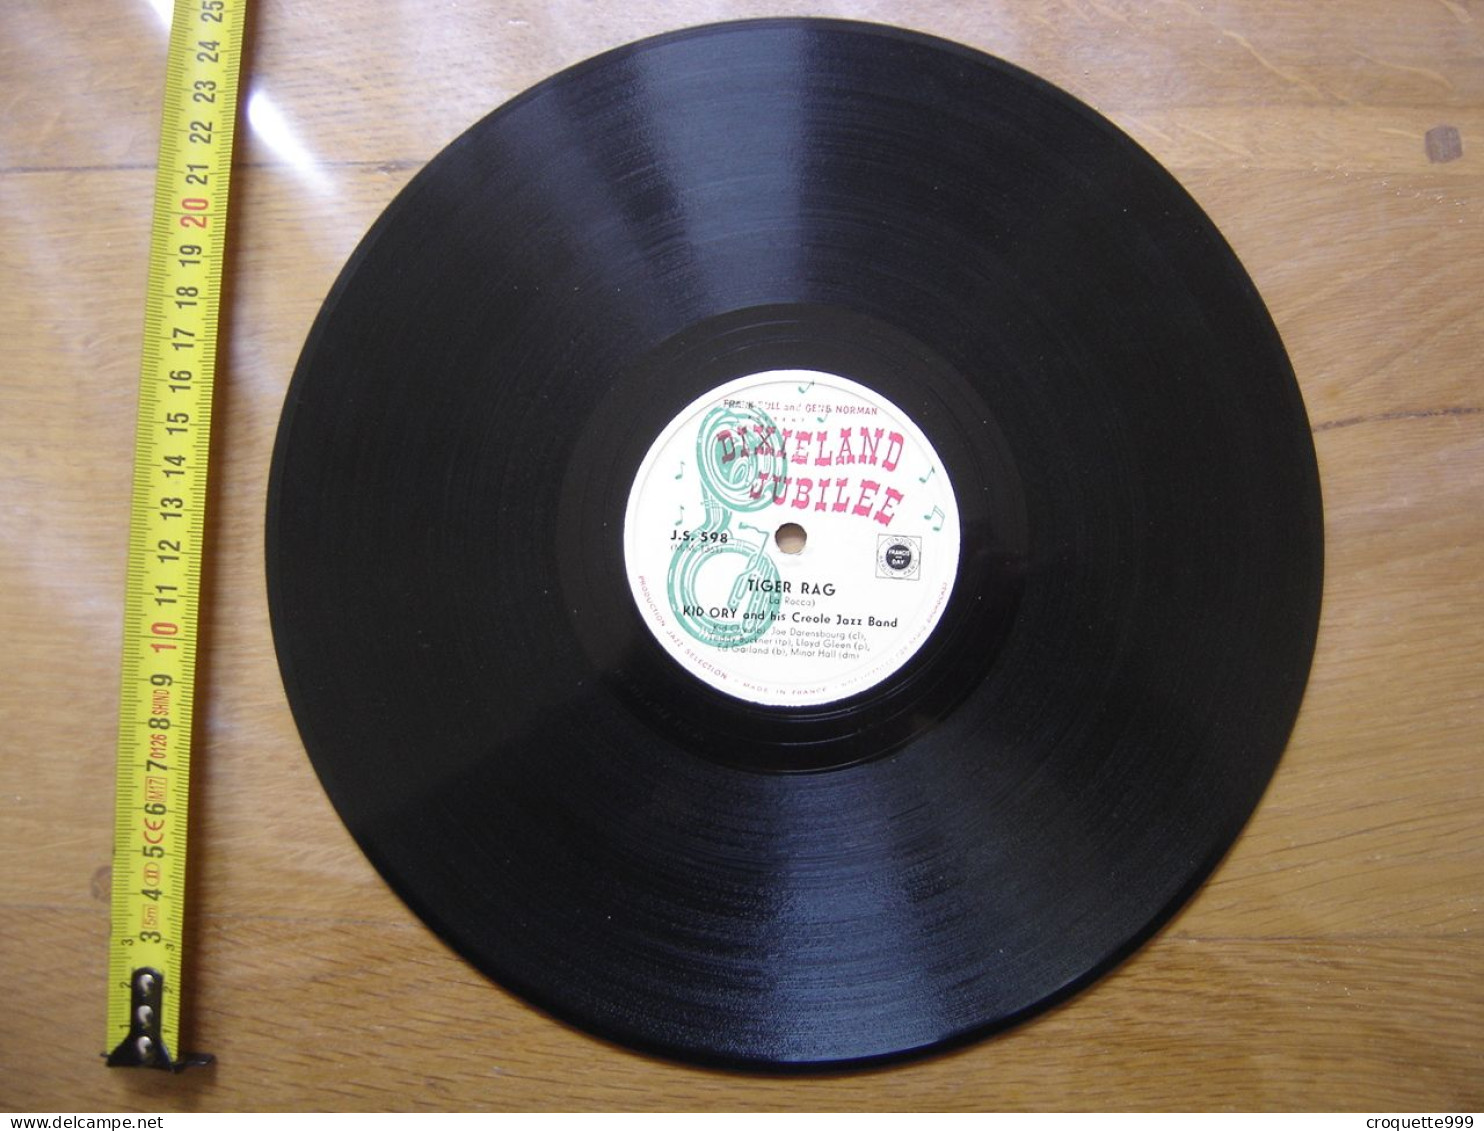 Disque 78 Tours 25 Cm KID ORY And His Creole Jazz Band Dixieland Jubilee J.S. 598 TIGER RAG EH LA BAS - 78 T - Disques Pour Gramophone